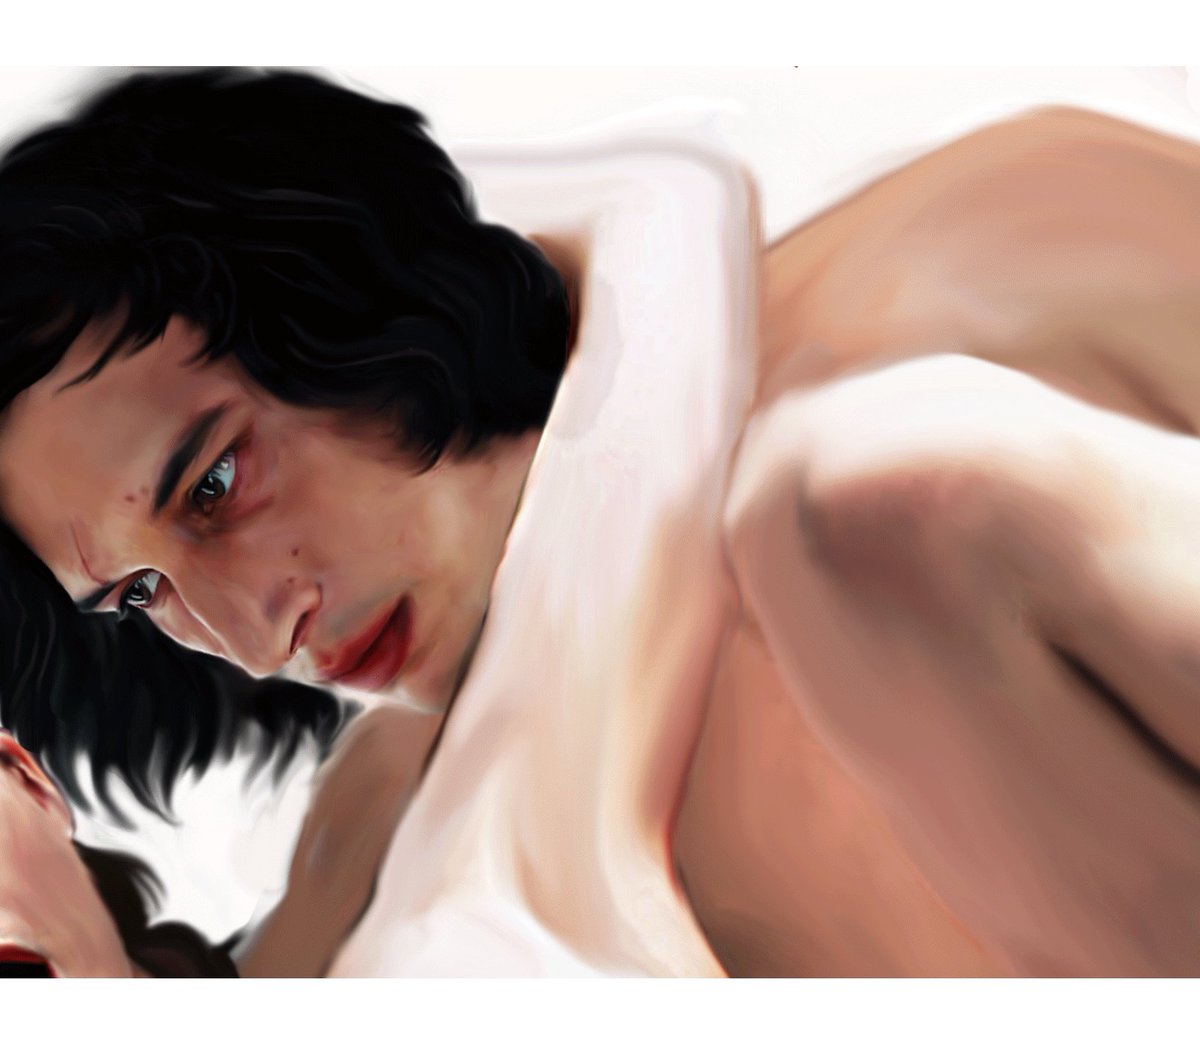 Reylo contest!
You win an art commission!
Just write a brie...